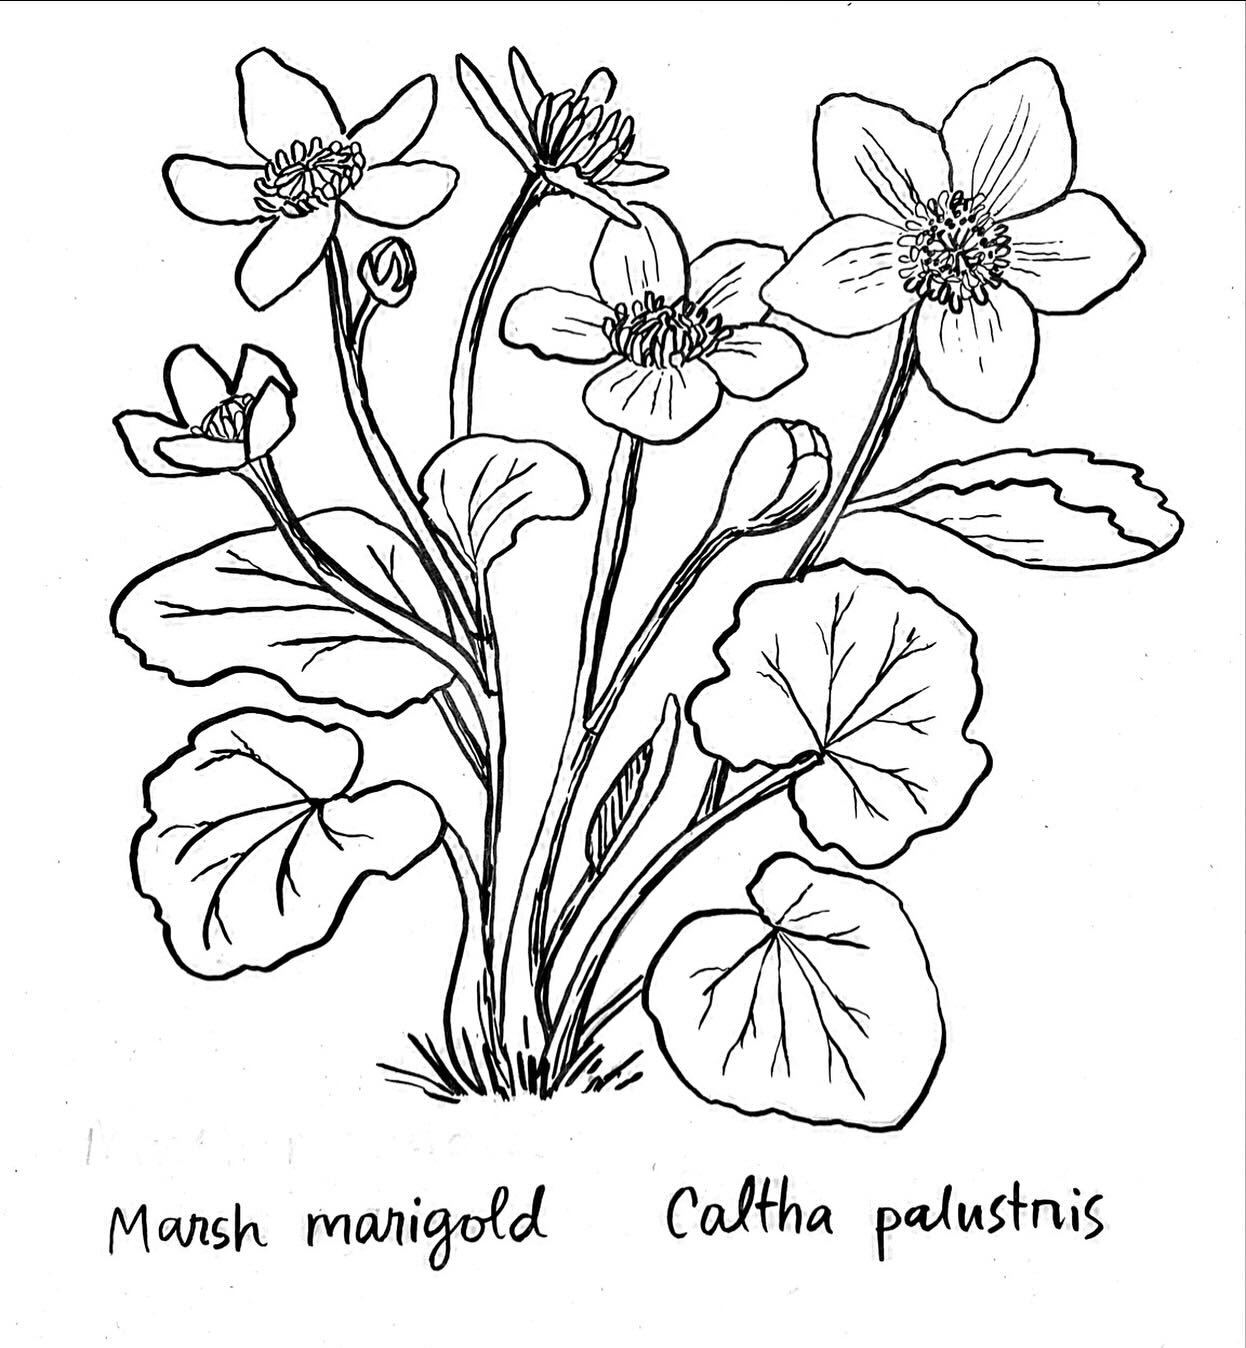 Here we go! My first drawing of (hopefully) a month of Northeastern plants. I chose to start with the Marsh Marigold because it&rsquo;s one of the earliest wild bloomers around here. Why don&rsquo;t you join me for the #aprilplantdrawingchallenge ? P